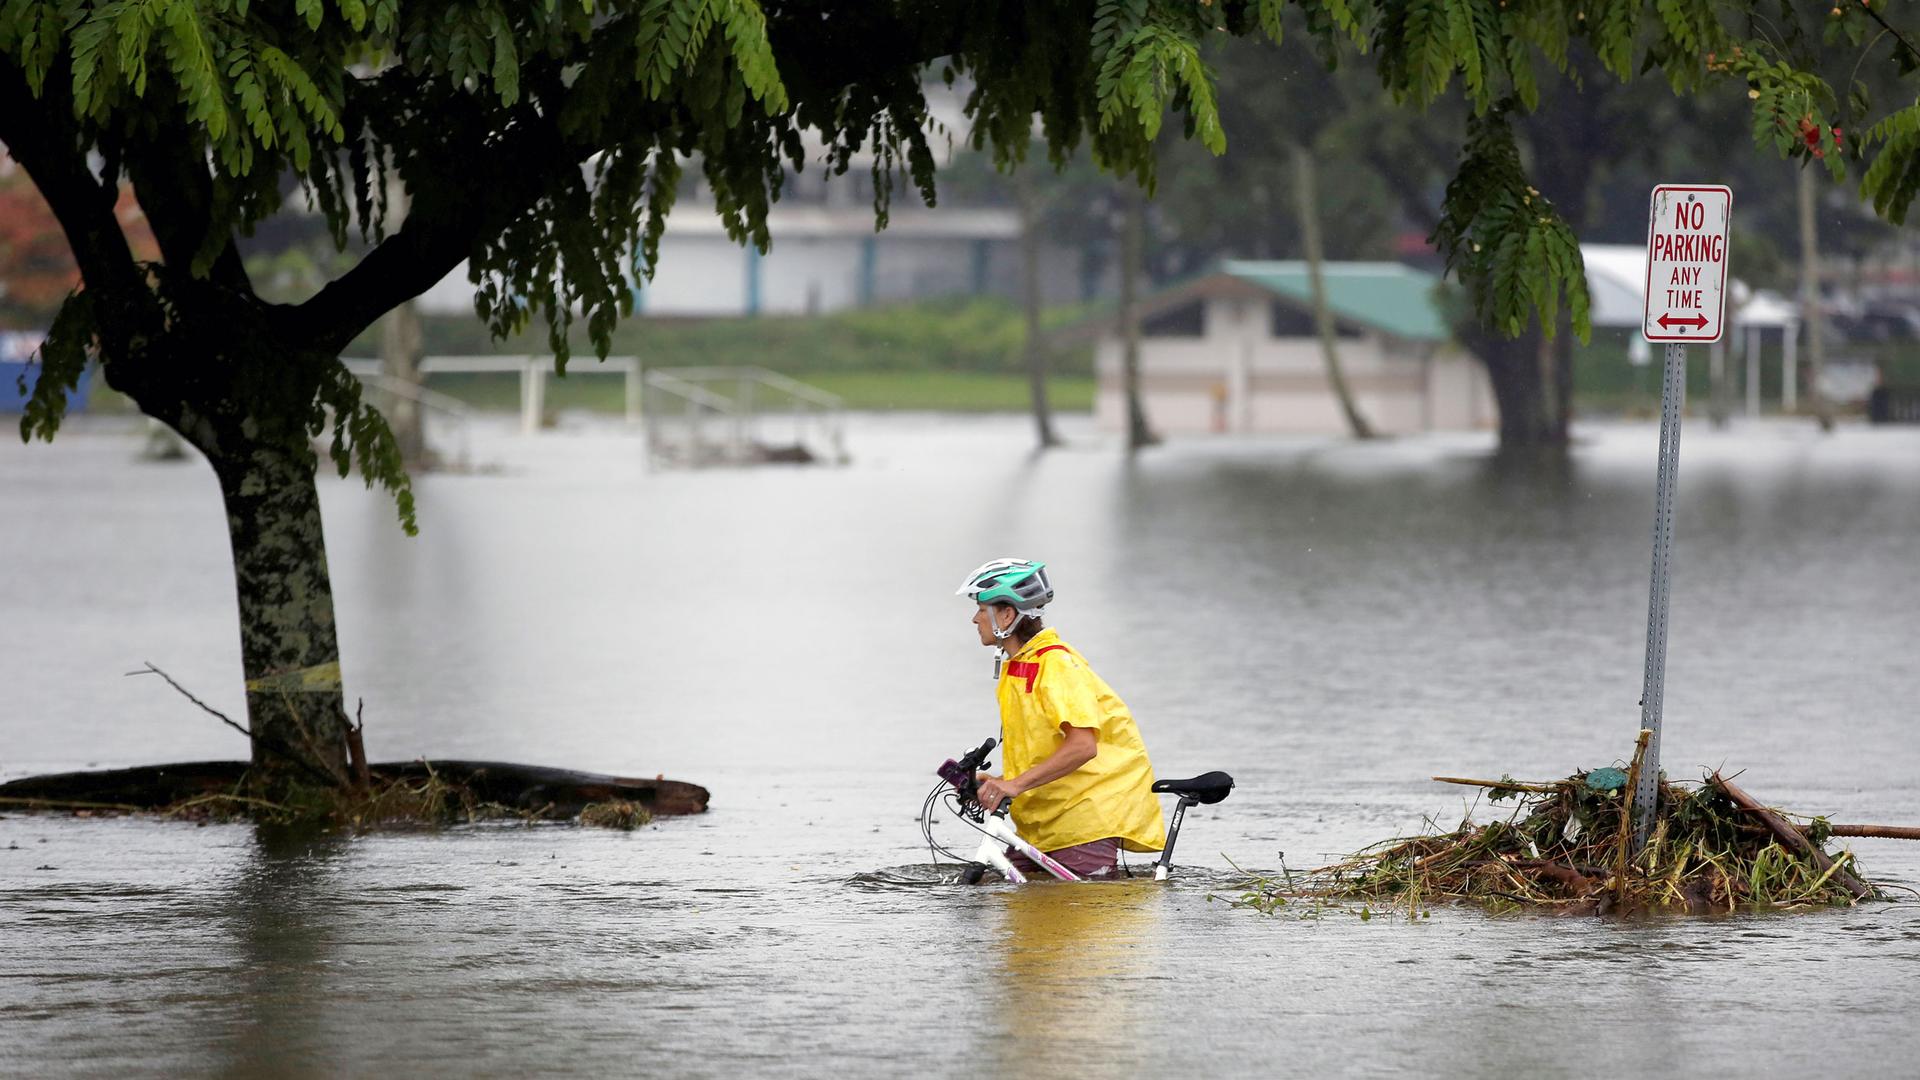 A woman rolls a bicycle through waist-high floodwaters